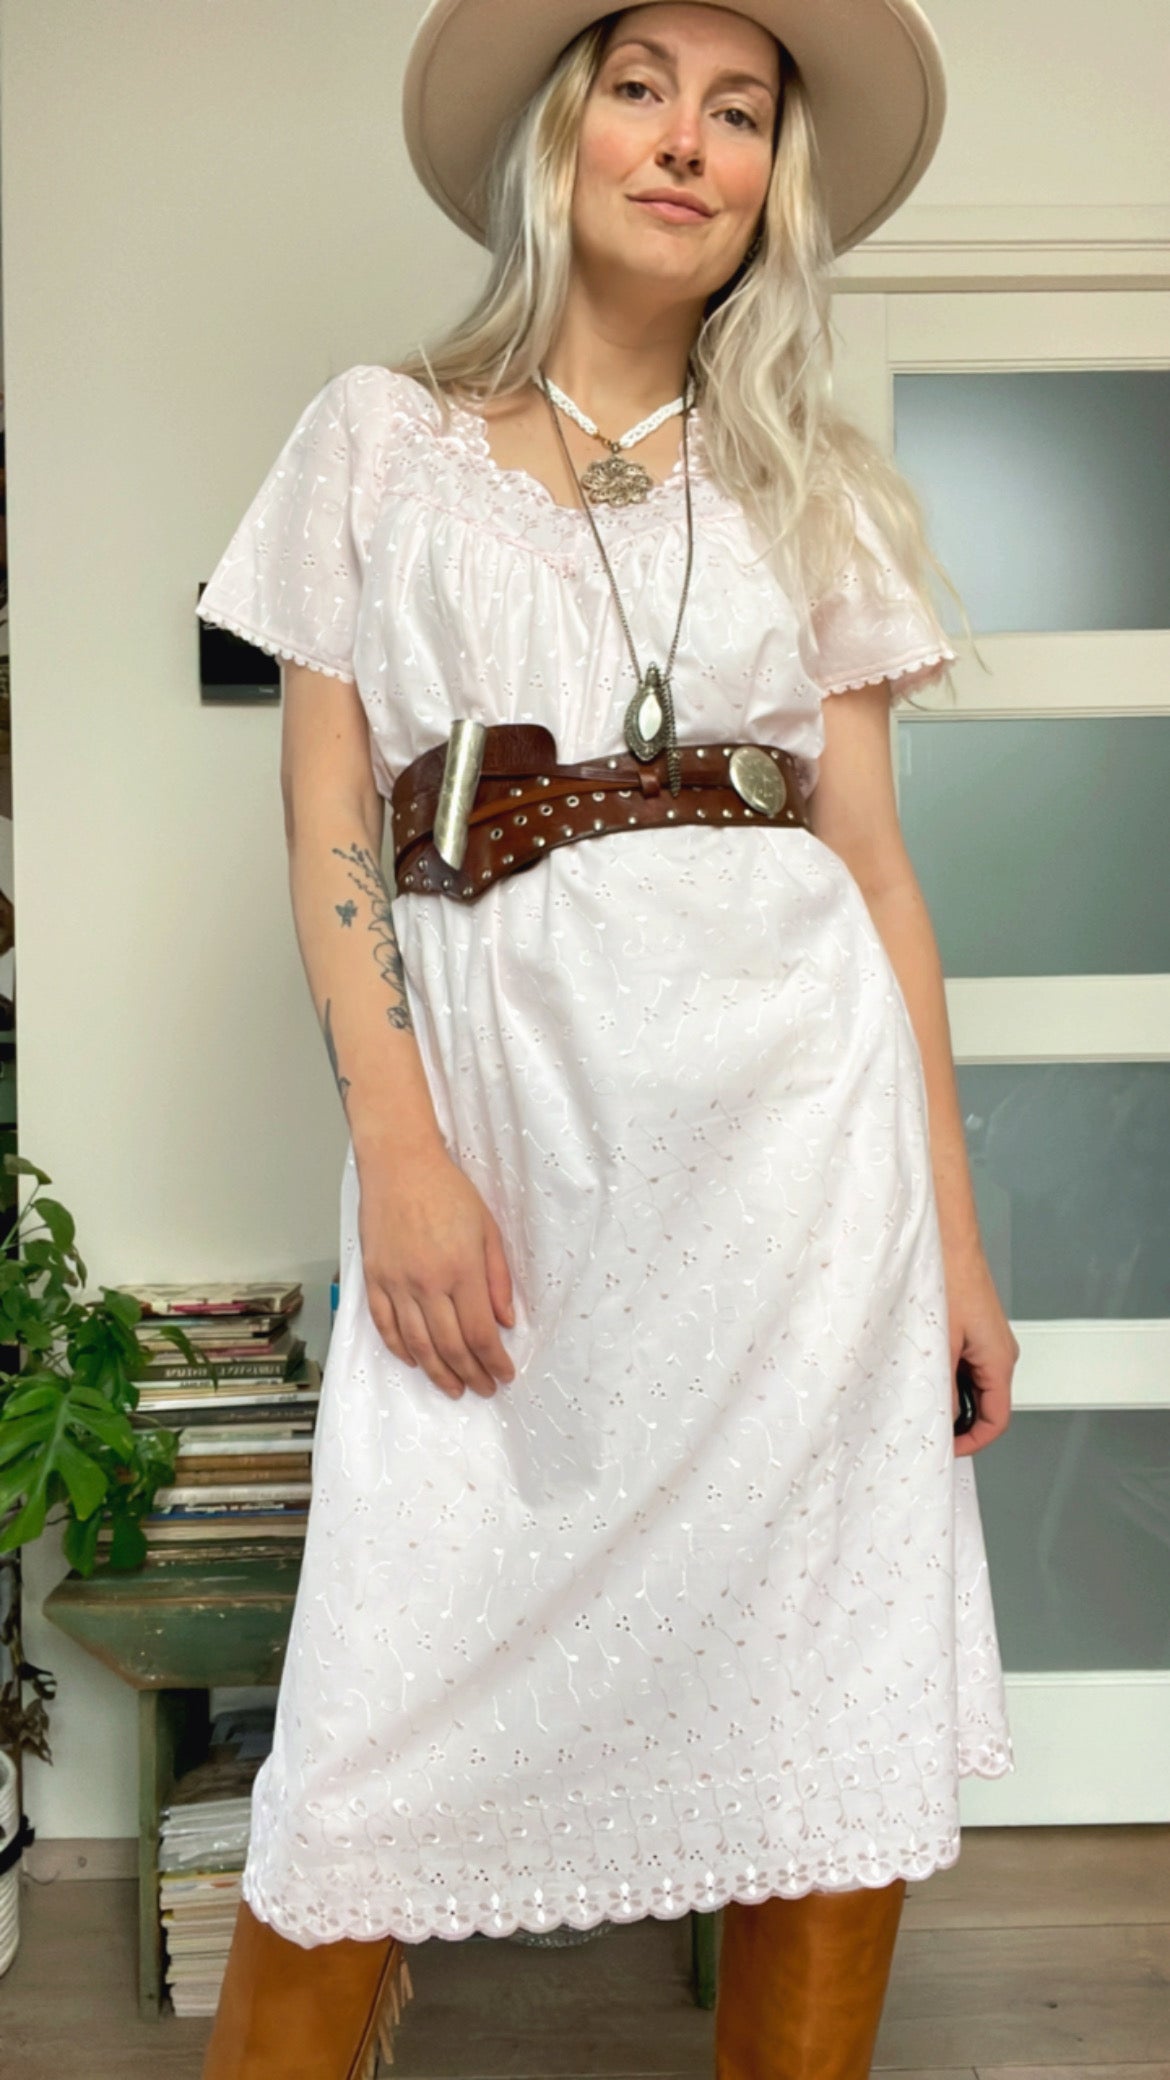 Broderie nightgown